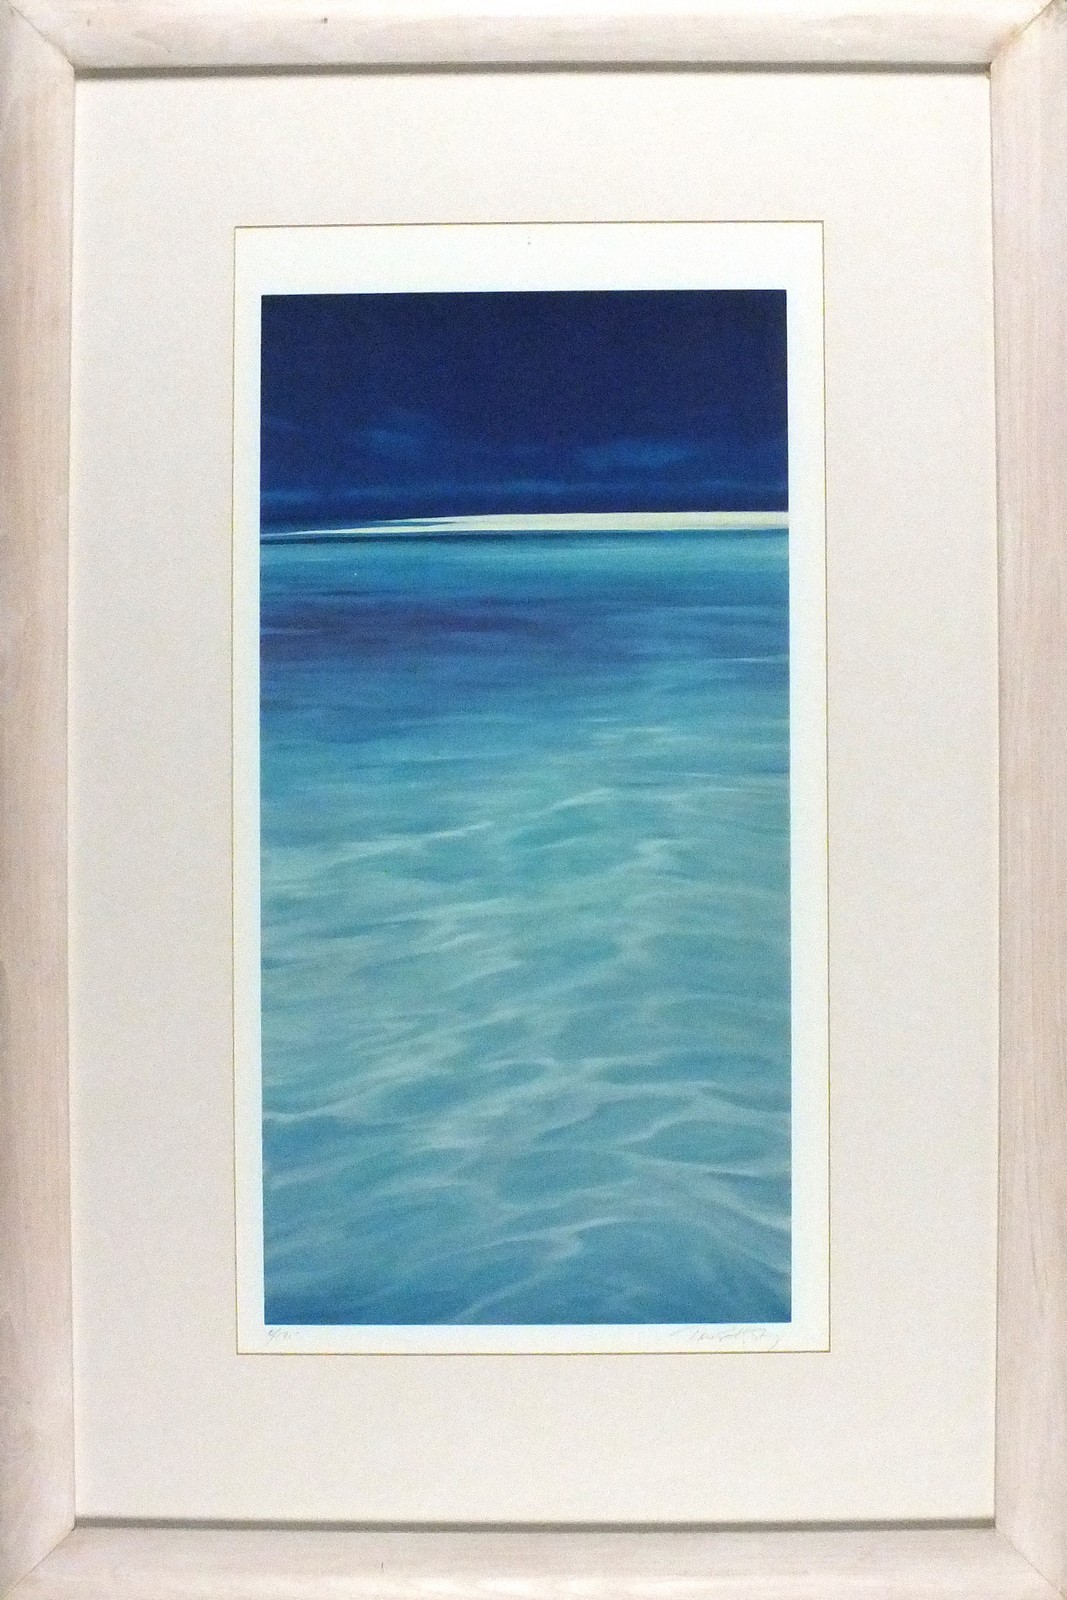 Penelope H STAREY (British 20th Century) Seascape, Lithograph, Signed and numbered 4/175 in pencil - Image 2 of 6